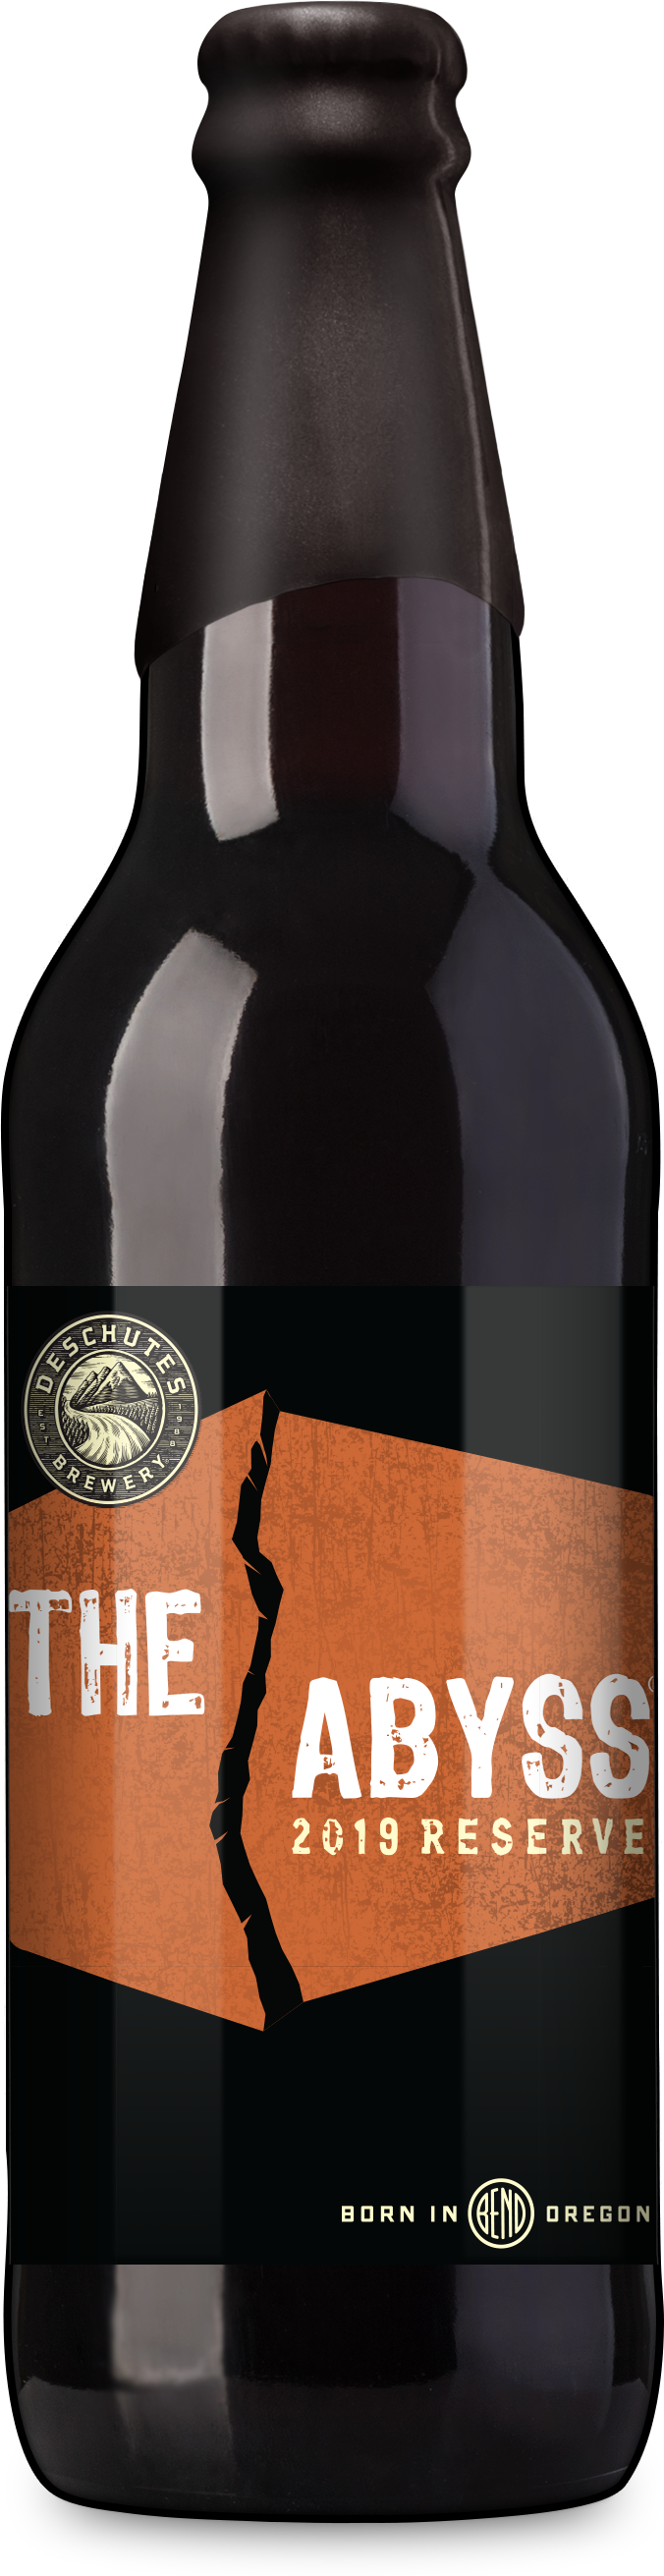 Buy Deschutes The Abyss 2019 Reserve Online -Craft City